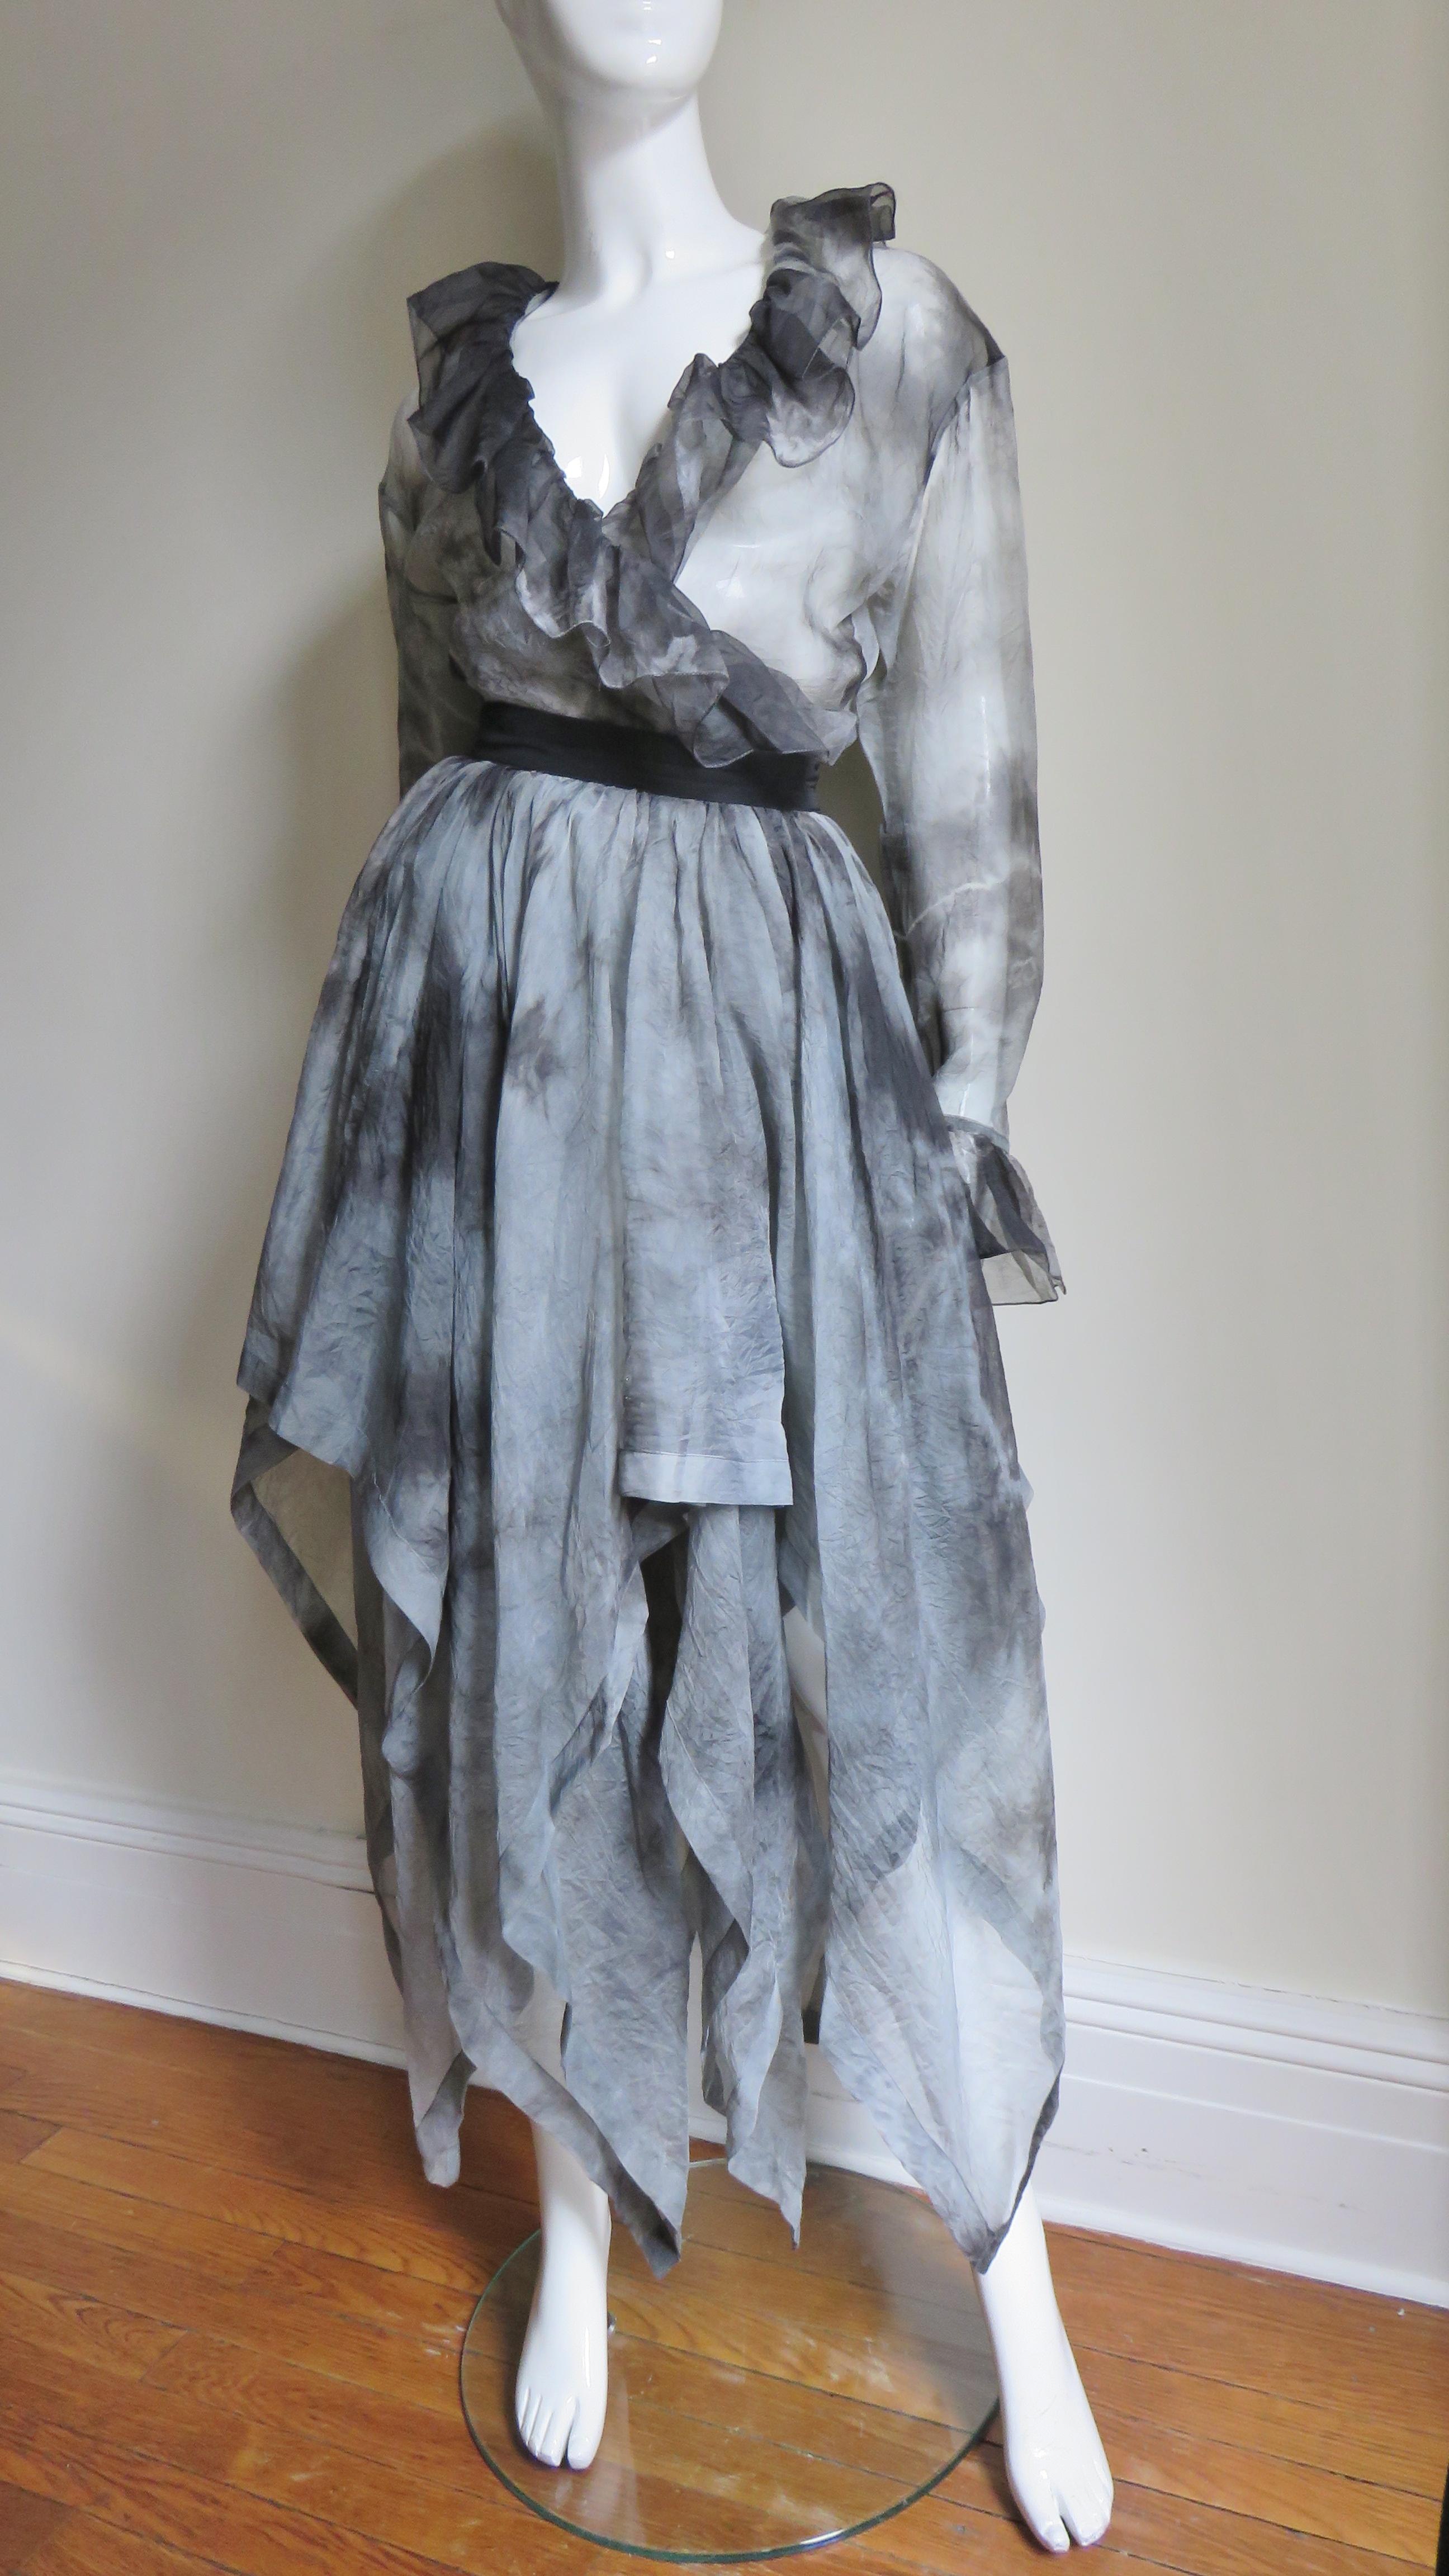 A fabulous semi sheer silk skirt and shirt set from Workers For Freedom, London in a grey and black tie dye pattern.  The long sleeve wrap or tie top has a ruffle around the neck, front and button cuffs. The skirt is comprised of 2 layers of